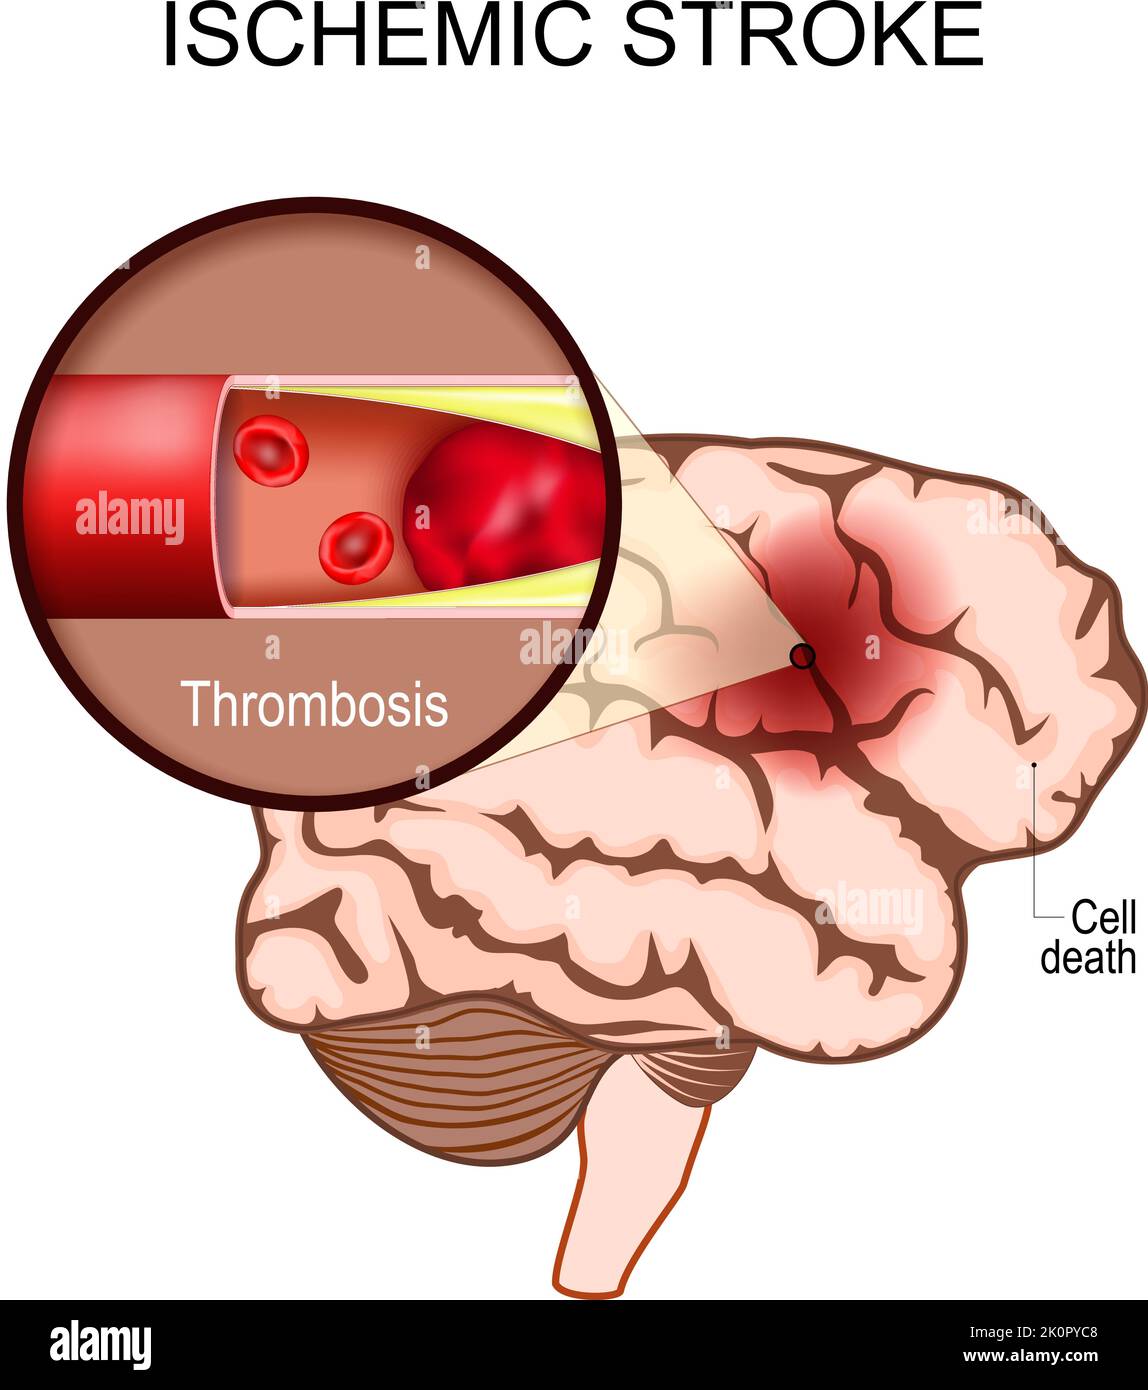 ischemic stroke. Human brain. Close-up of a blood clot in an artery resulting in brain death to the affected area. Thrombosis. Cerebral infarction Stock Vector